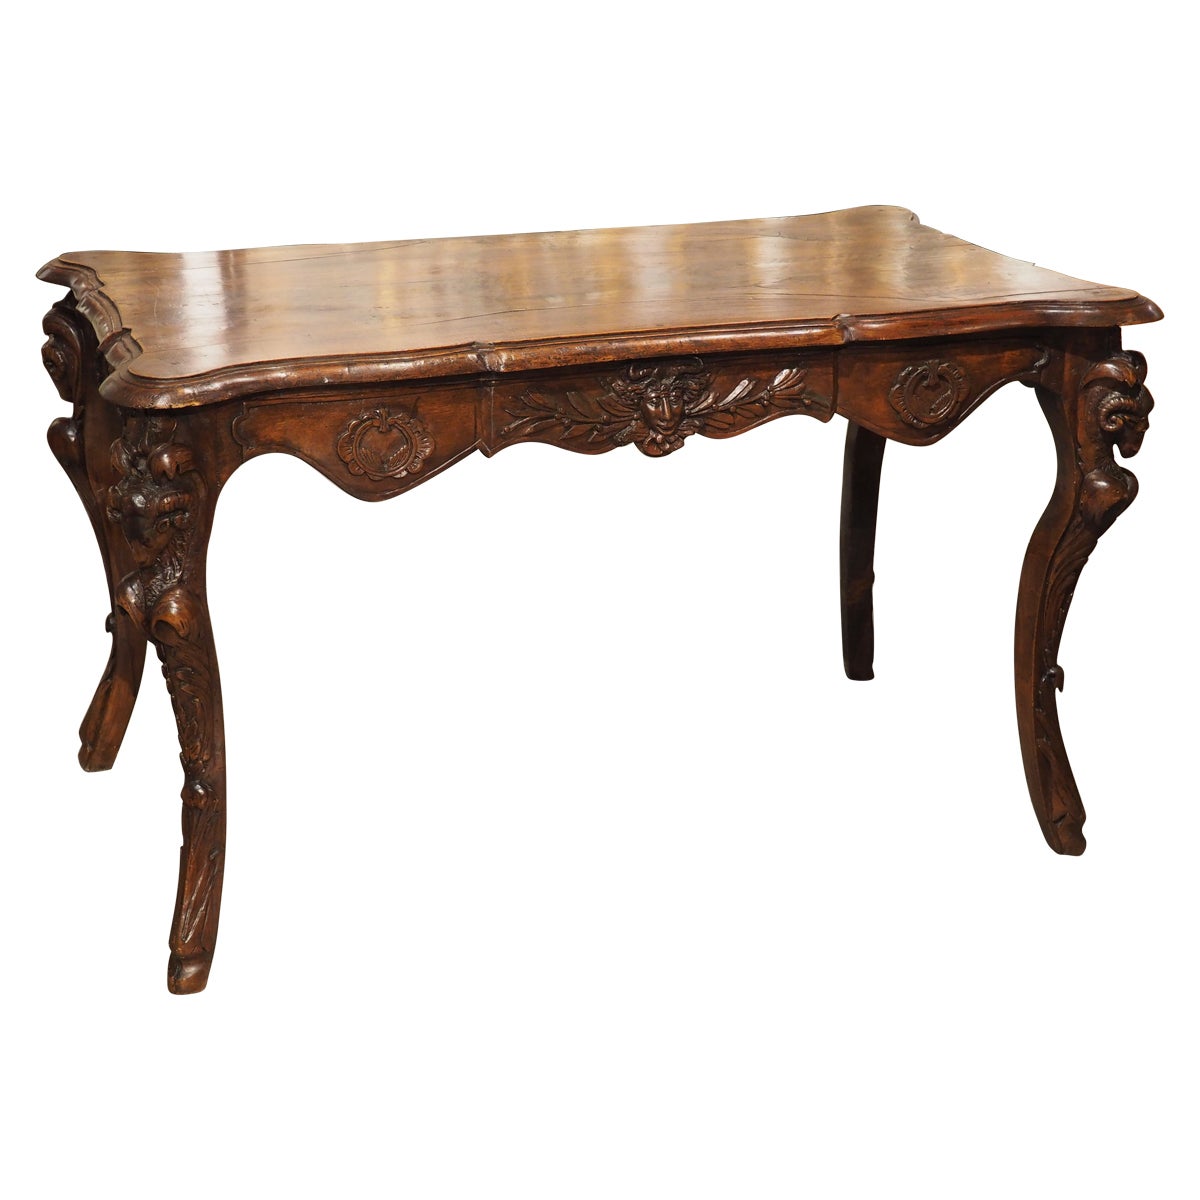 Circa 1870 French Walnut Wood Center Table with Rams' Heads and Fleur De Lys For Sale